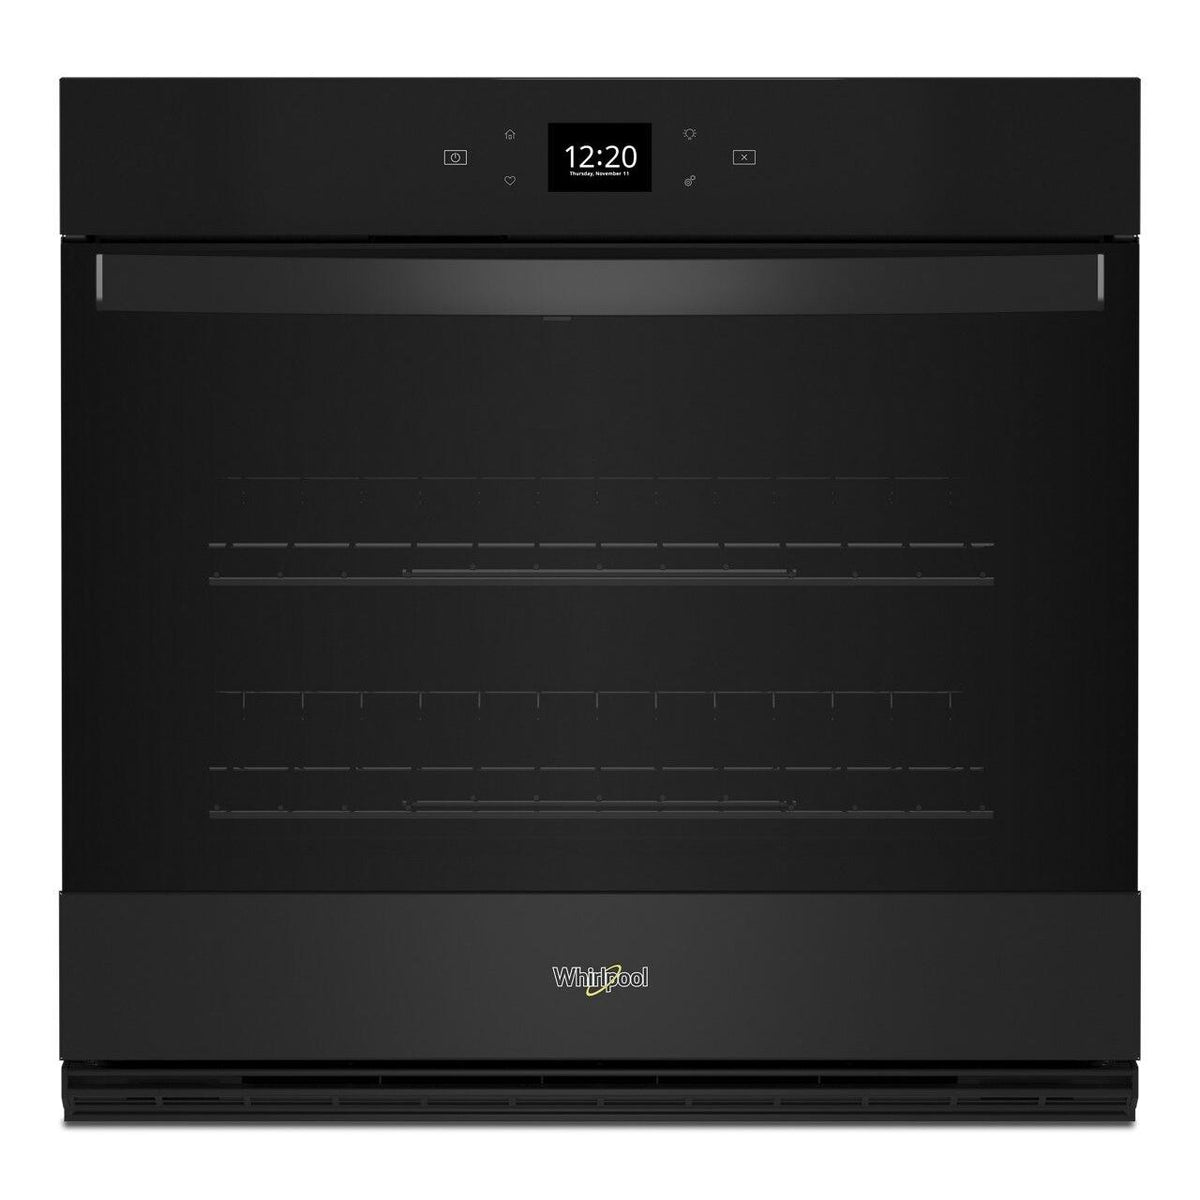 27-inch Built-in Single Wall Oven WOES5027LB IMAGE 1